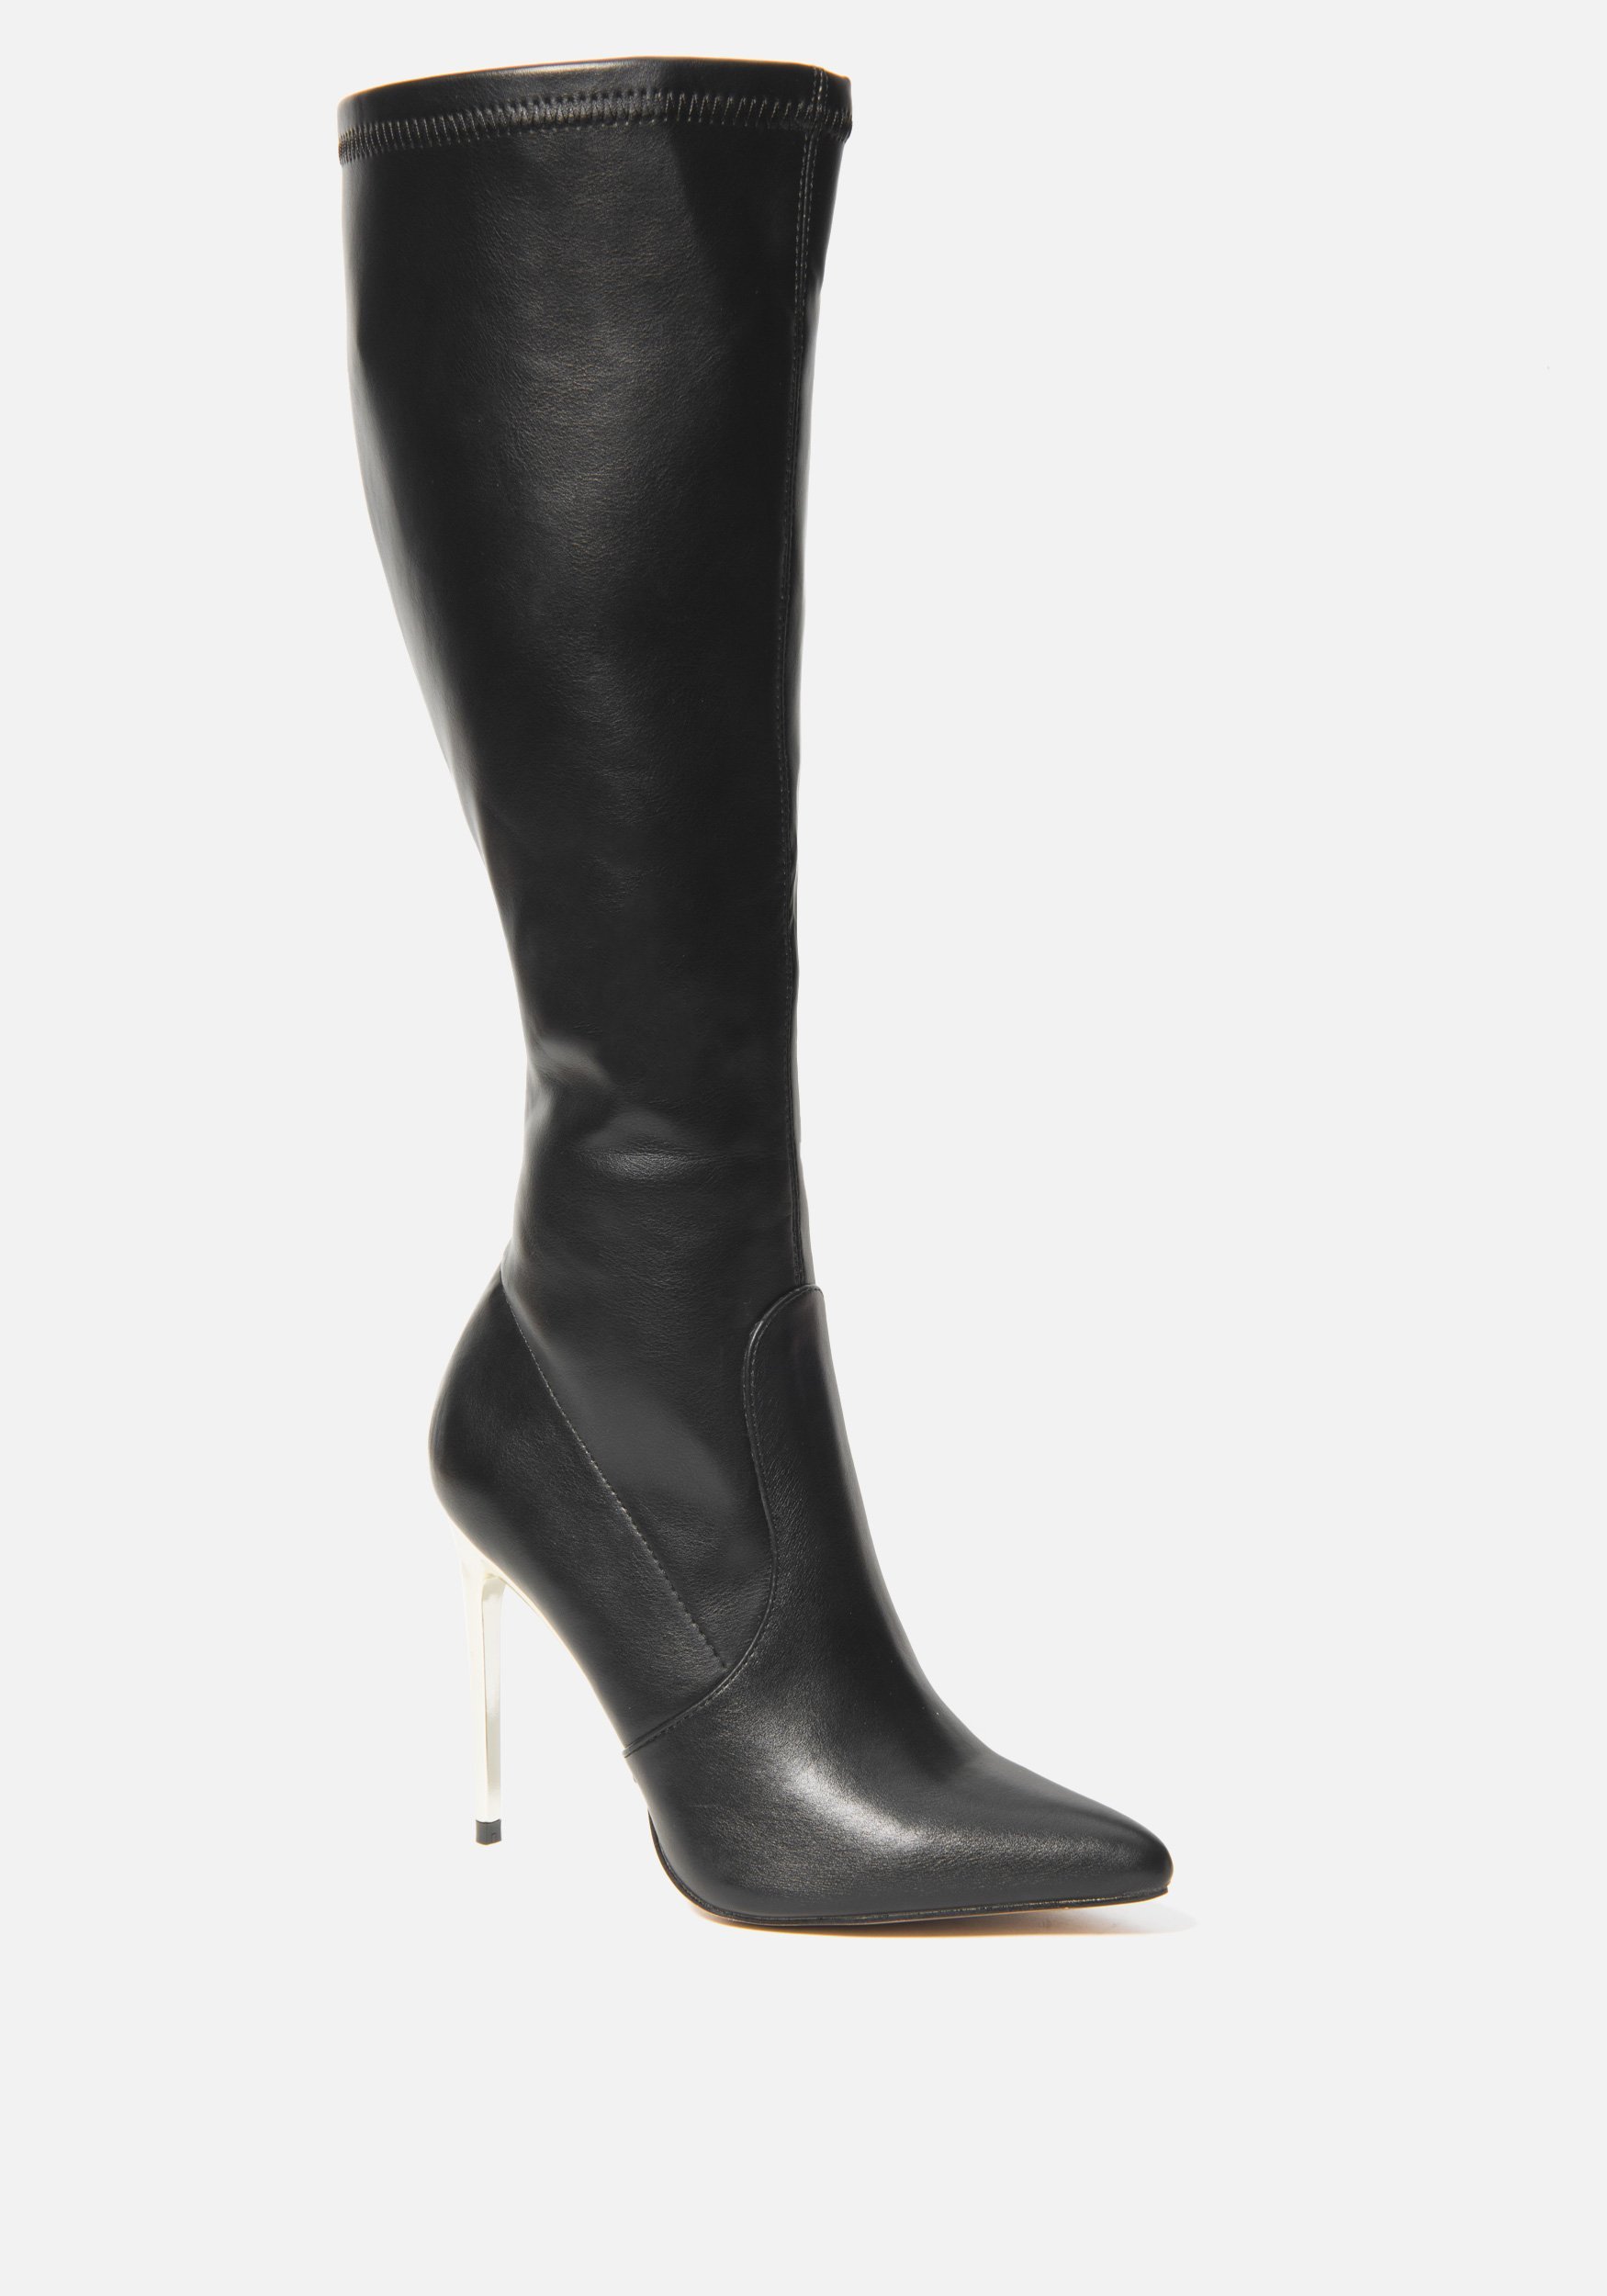 Bebe Women's Valeria Knee High Boots, Size 7.5 in BLACK Synthetic